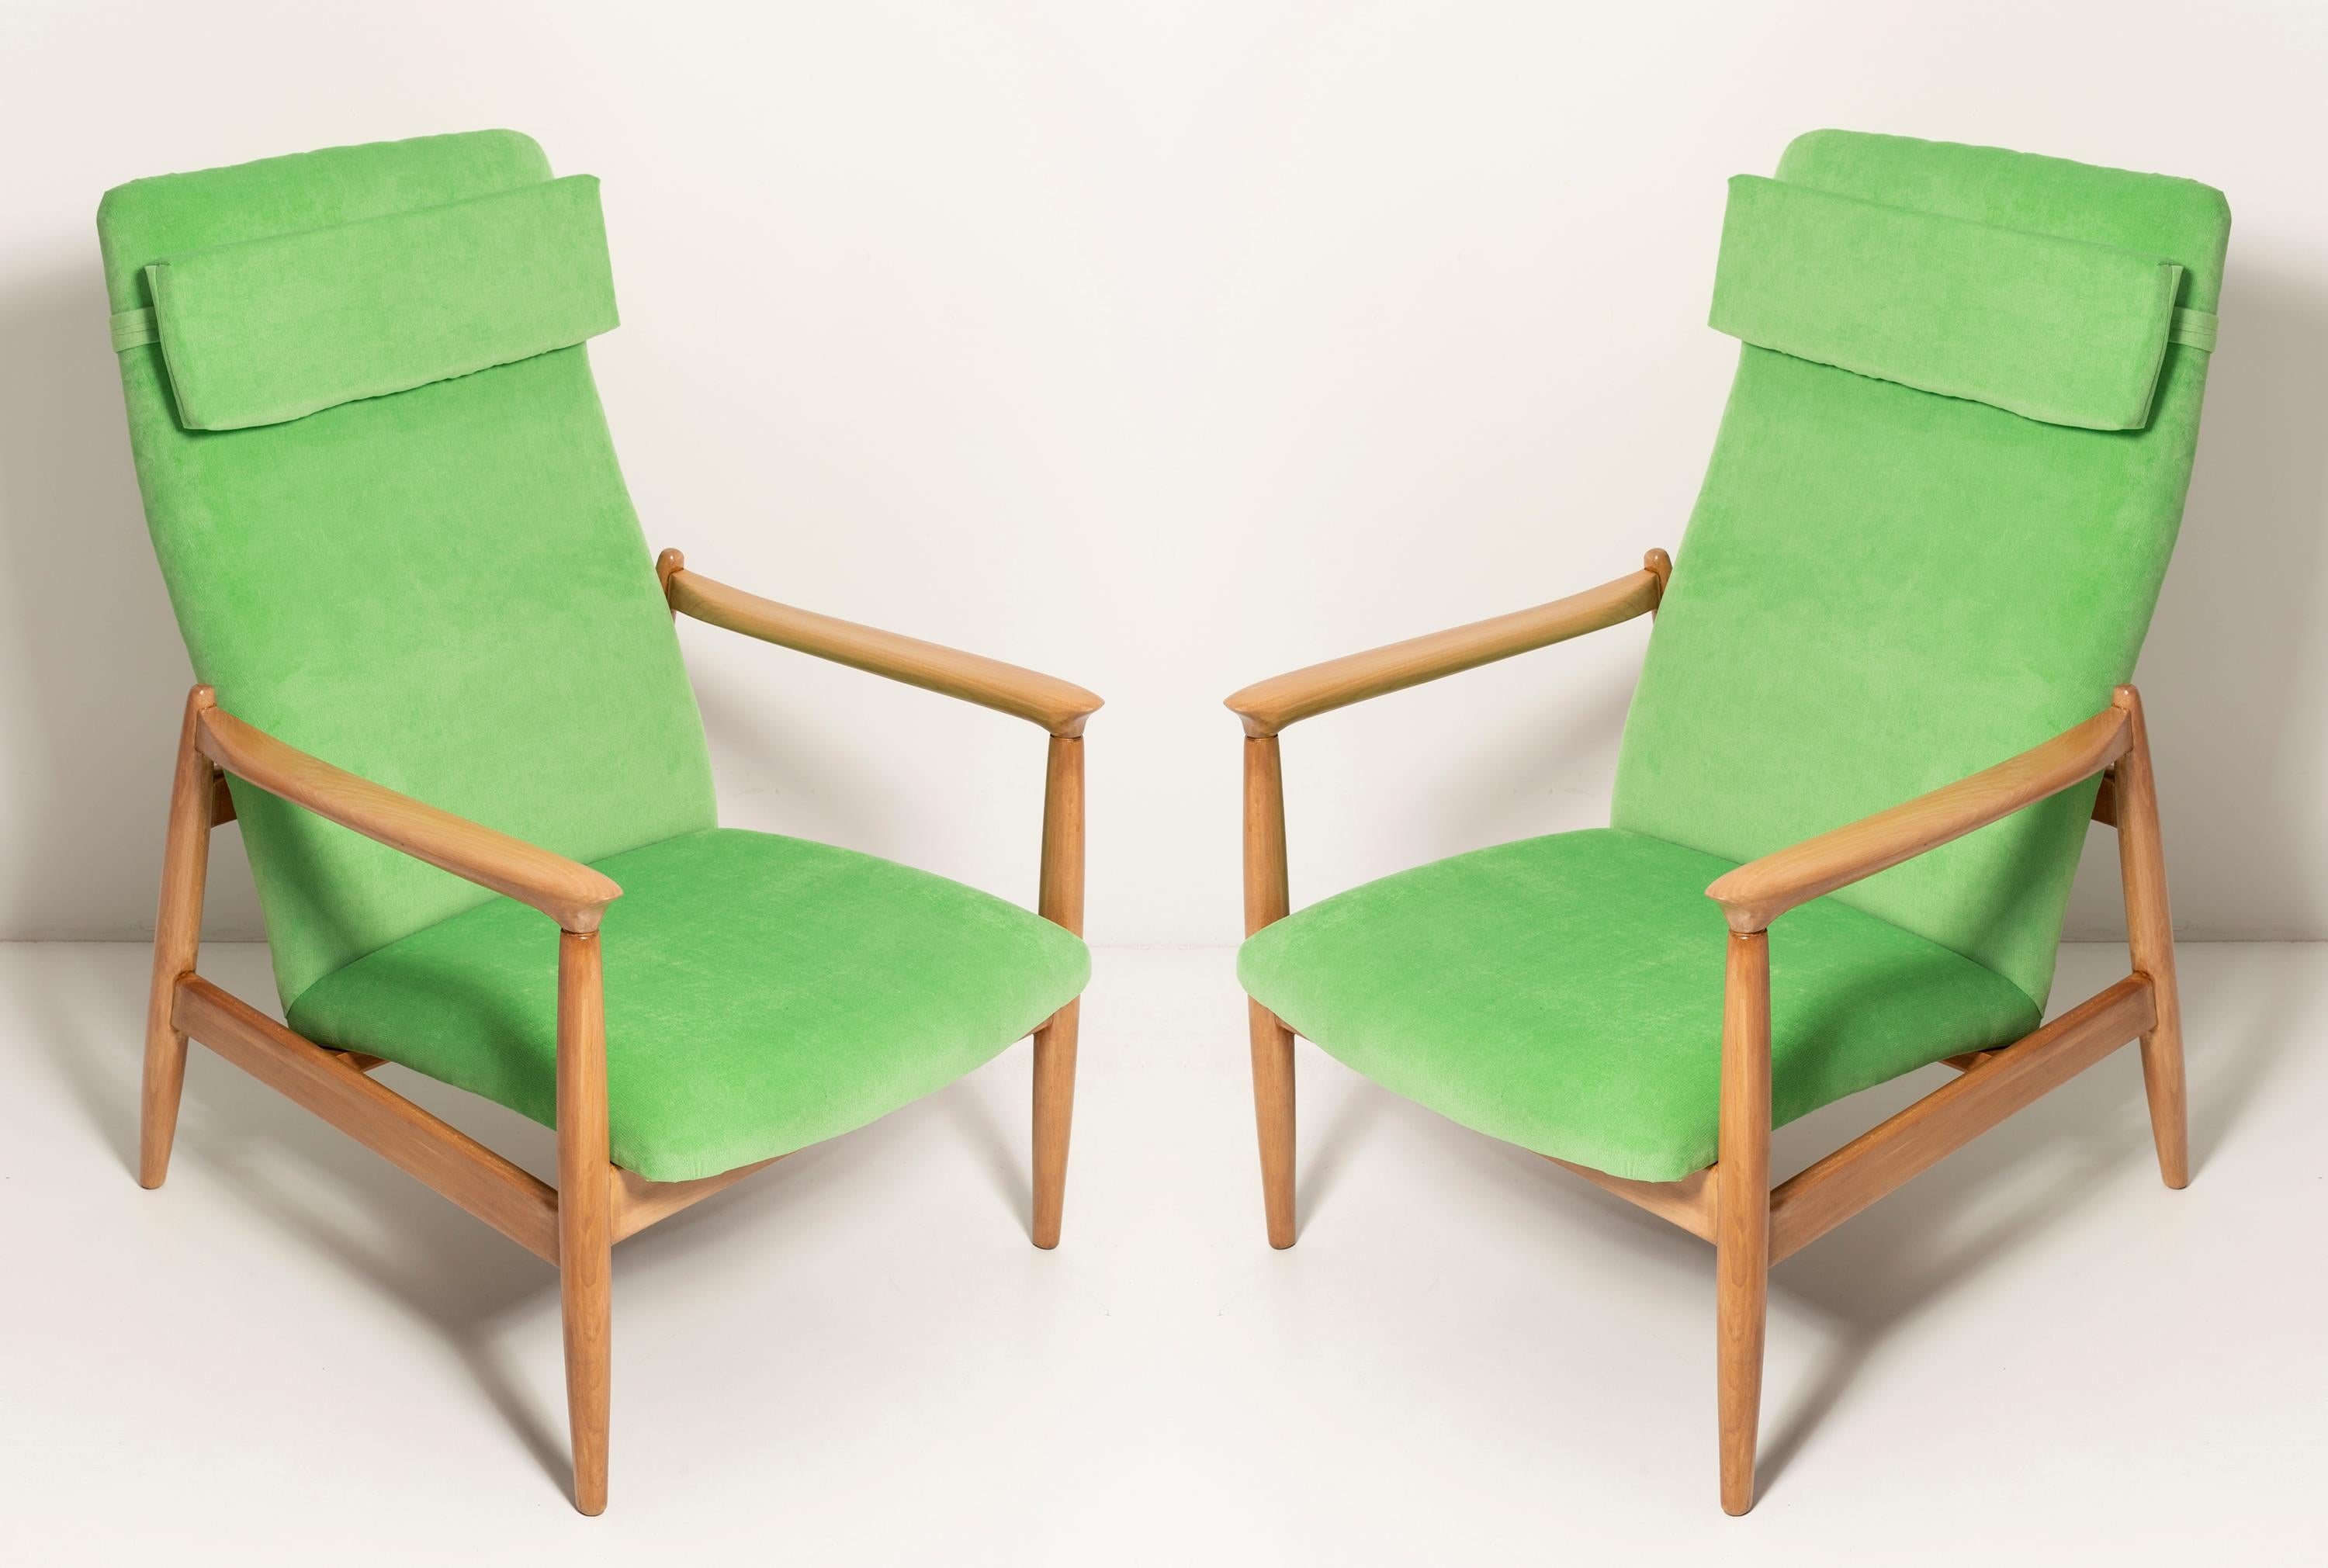 A pair of light lime green velvet armchairs (color number 50), designed by Edmund Homa, a Polish architect, designer of Industrial Design and interior architecture, professor at the Academy of Fine Arts in Gdansk.

The armchairs were made in the